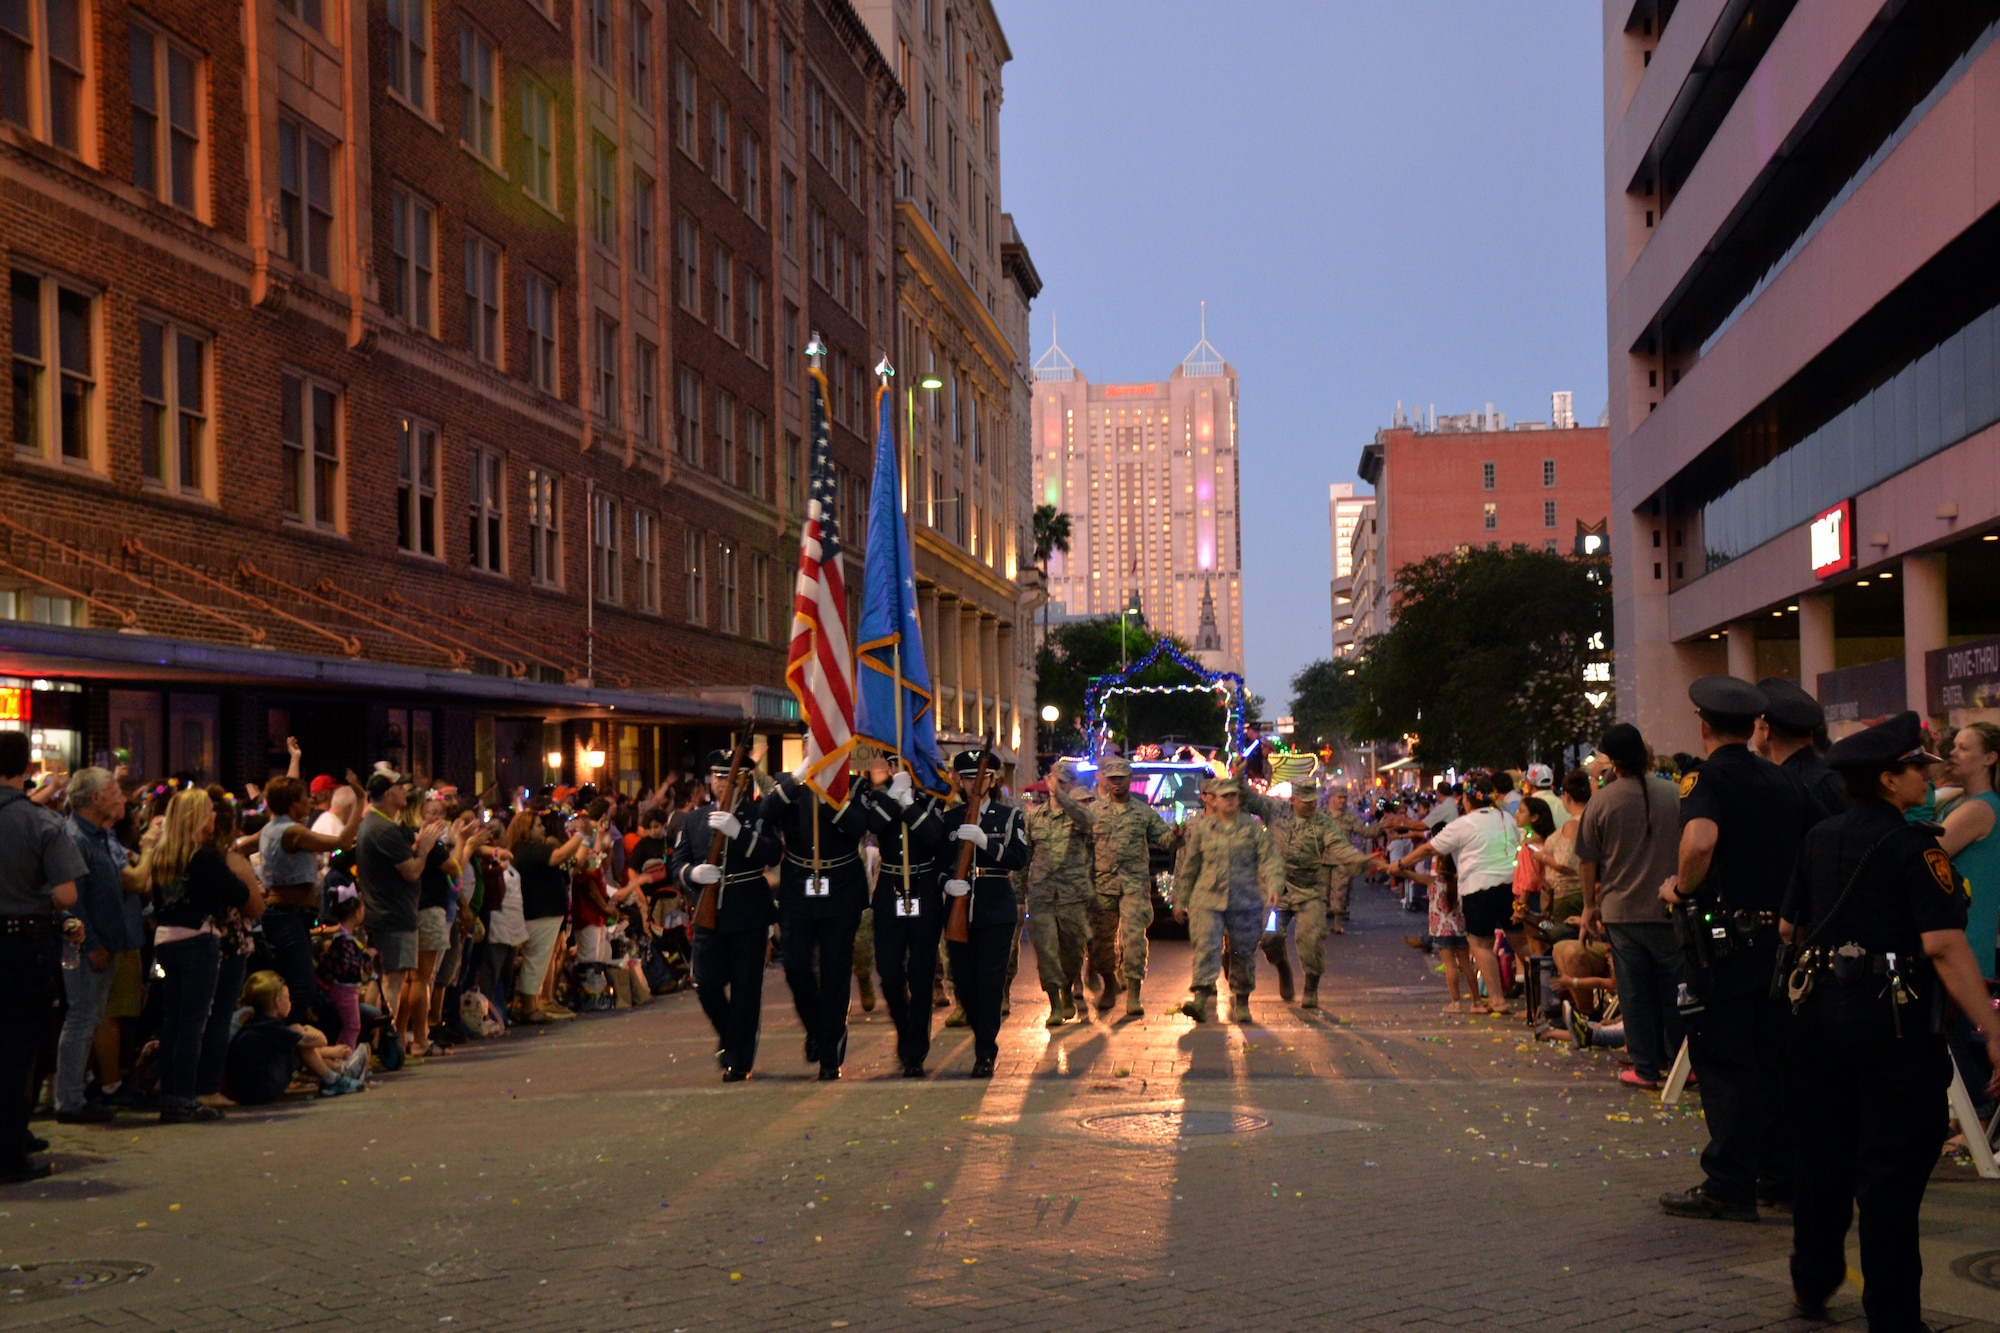 The 433rd Airlift Wing's Honor Guard leads the 433rd Airlift Wing and 960th Cyberspace Wing walkers and float on Commerce Street in downtown San Antonio during the 71st annual Fiesta Flambeau Parade, April 27, 2019.